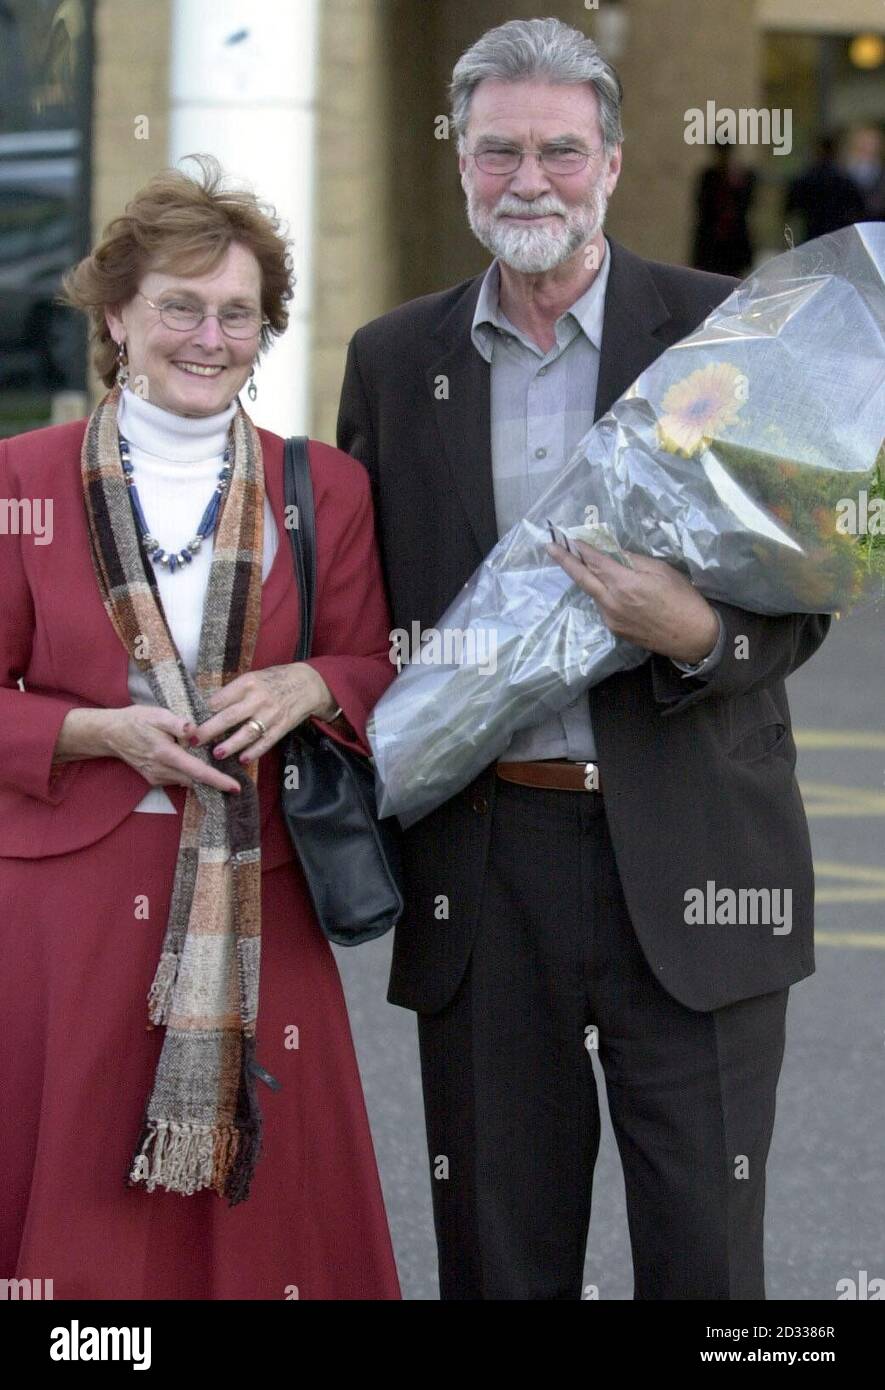 Pauline MacAulay, the mother in law of Britain's Chancellor Gordon Brown and her husband Patrick Vaghan, (Step father of Sarah Brown), at Edinburgh Royal Infirmary after Sarah Brown gave birth, to a baby boy.  Stock Photo